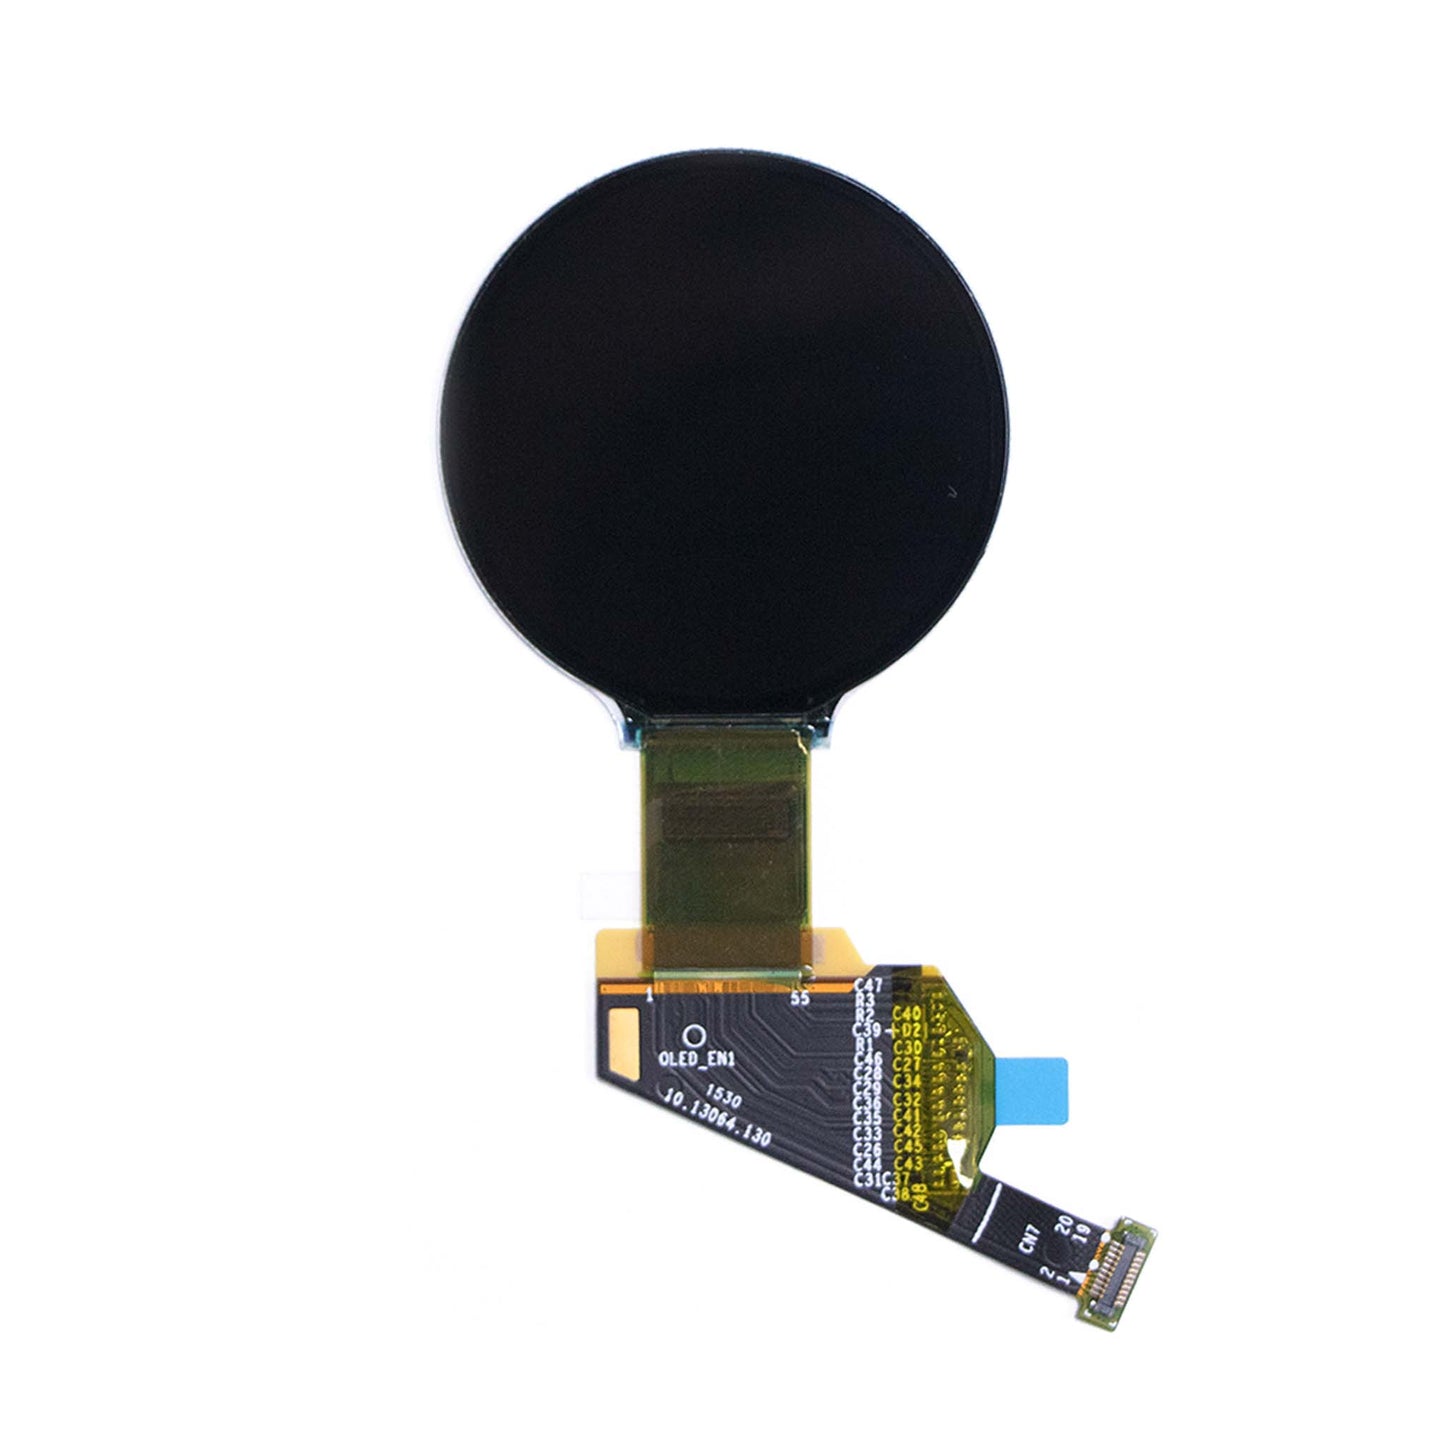 1.39-inch Round AMOLED Display, 400x400 resolution, 300 nits, 16.7M colors, MIPI interface